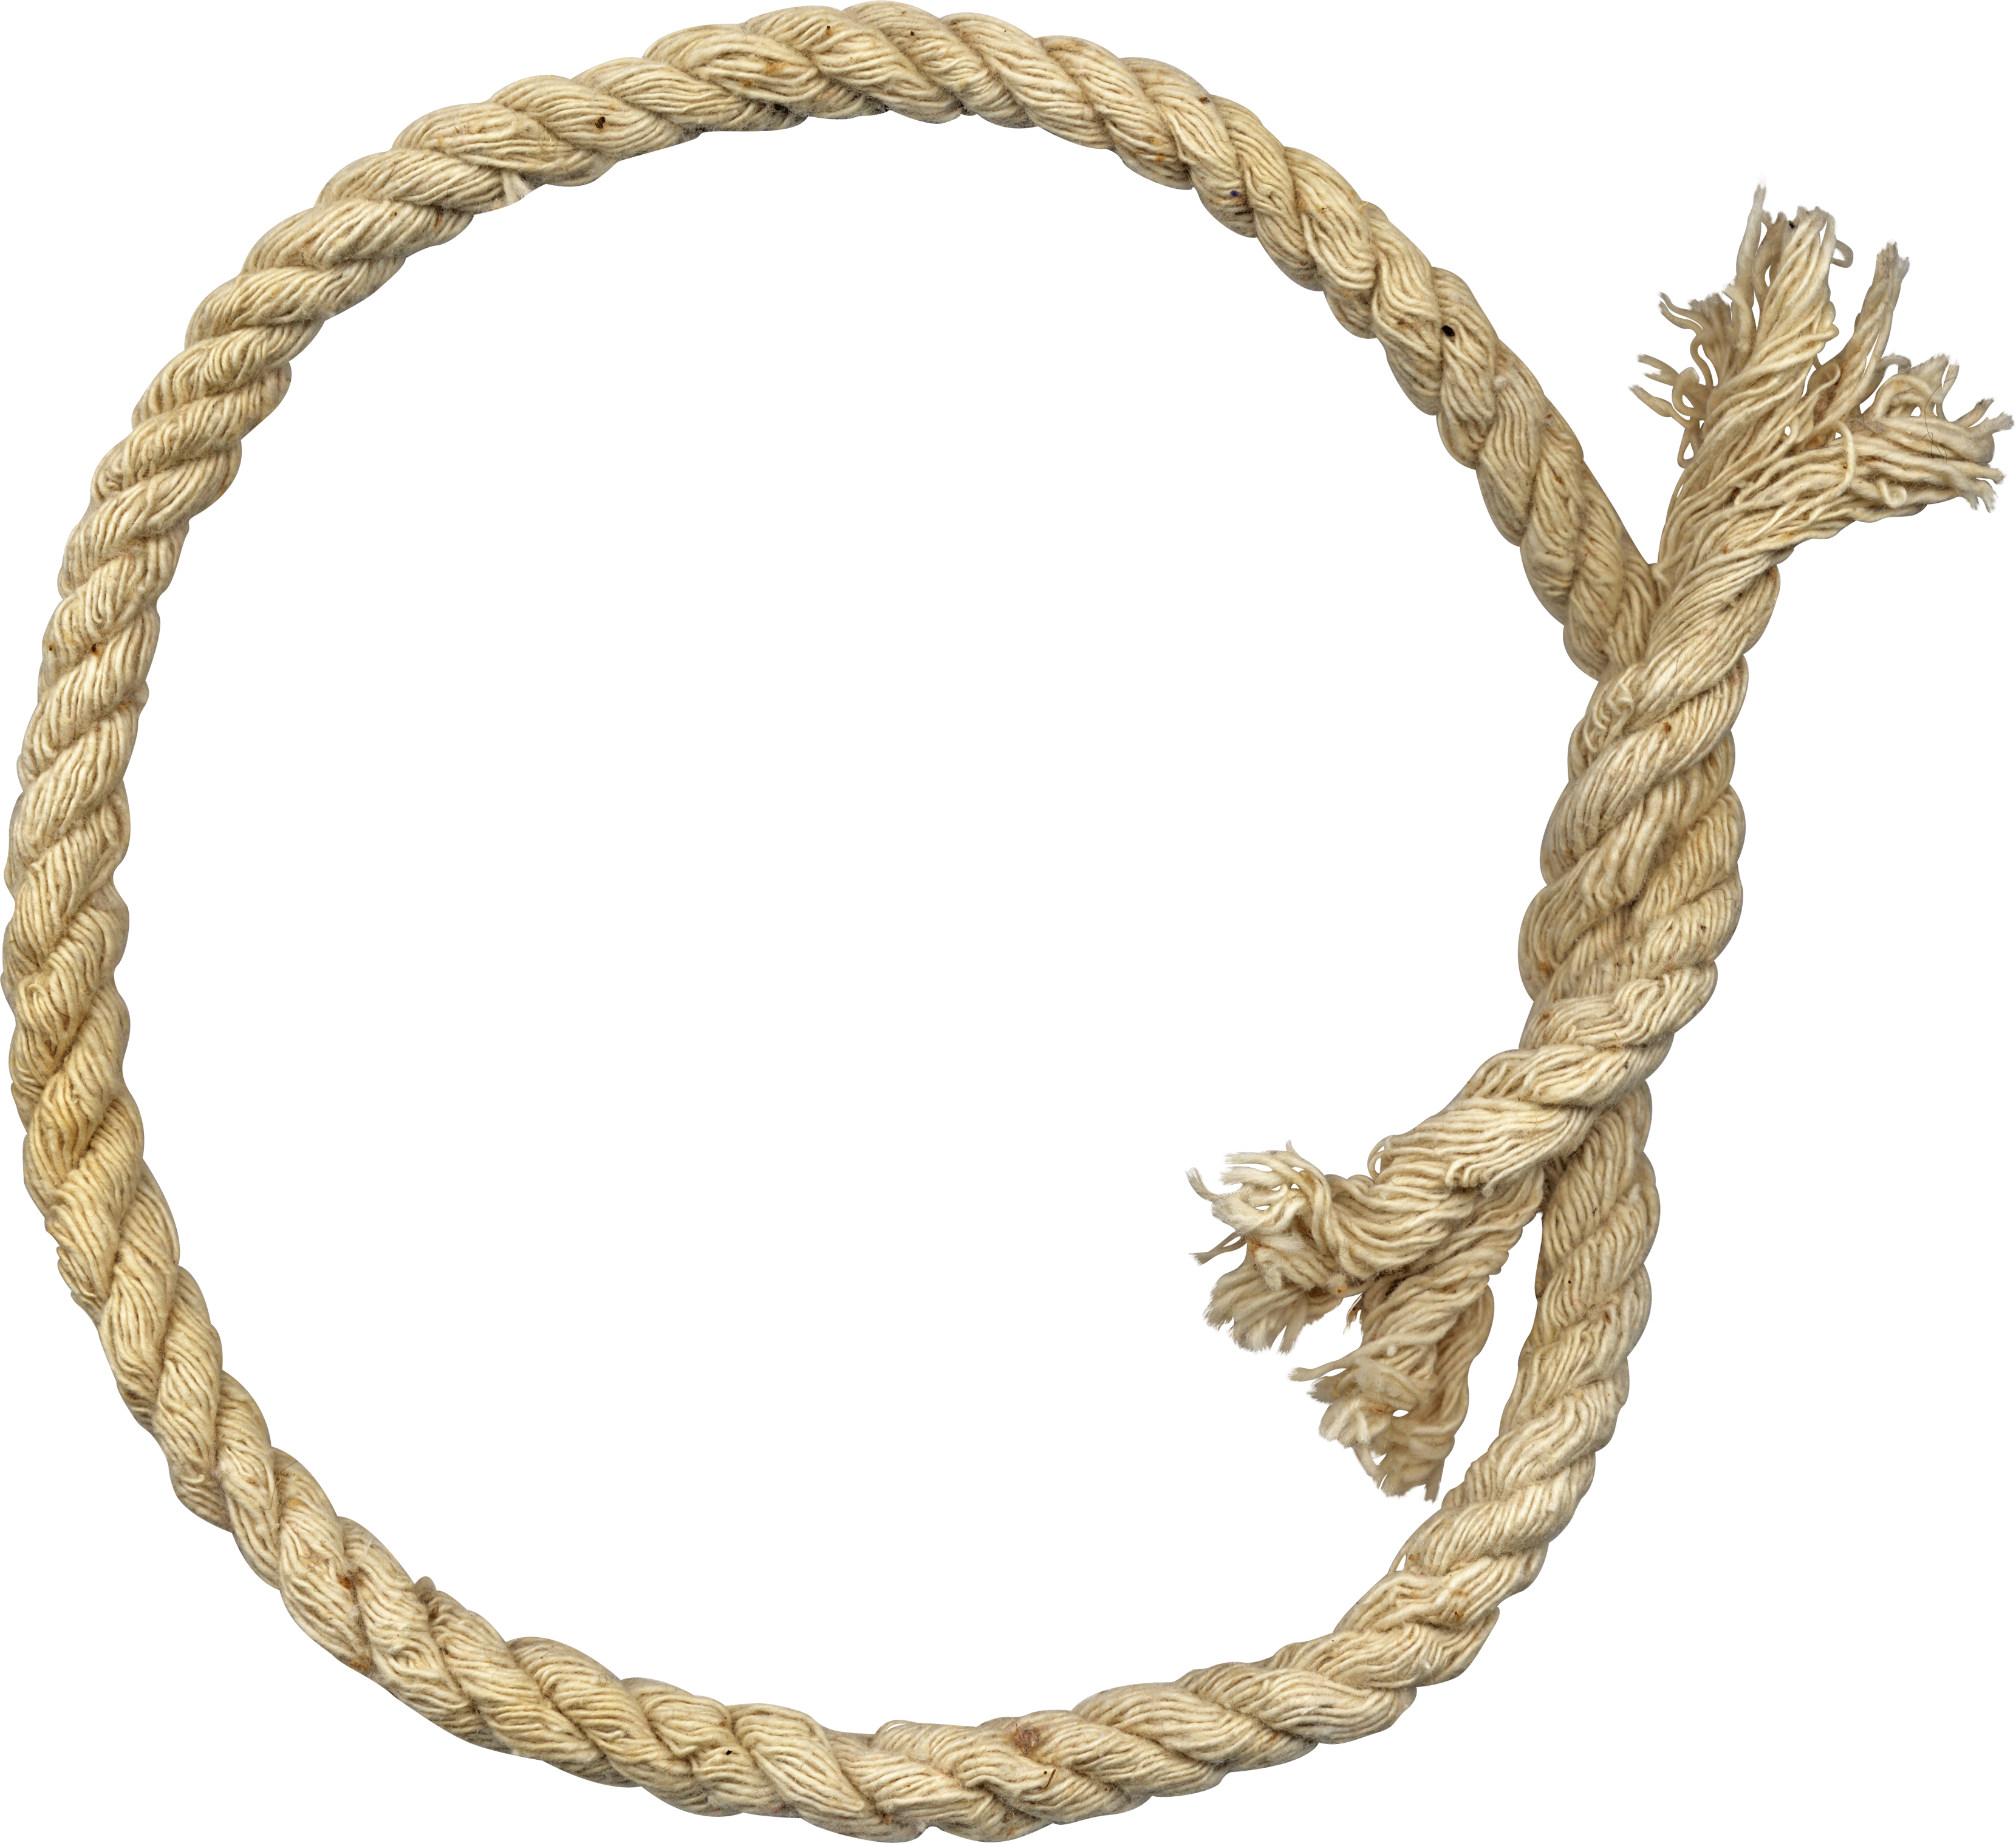 Rope PNG images free download.